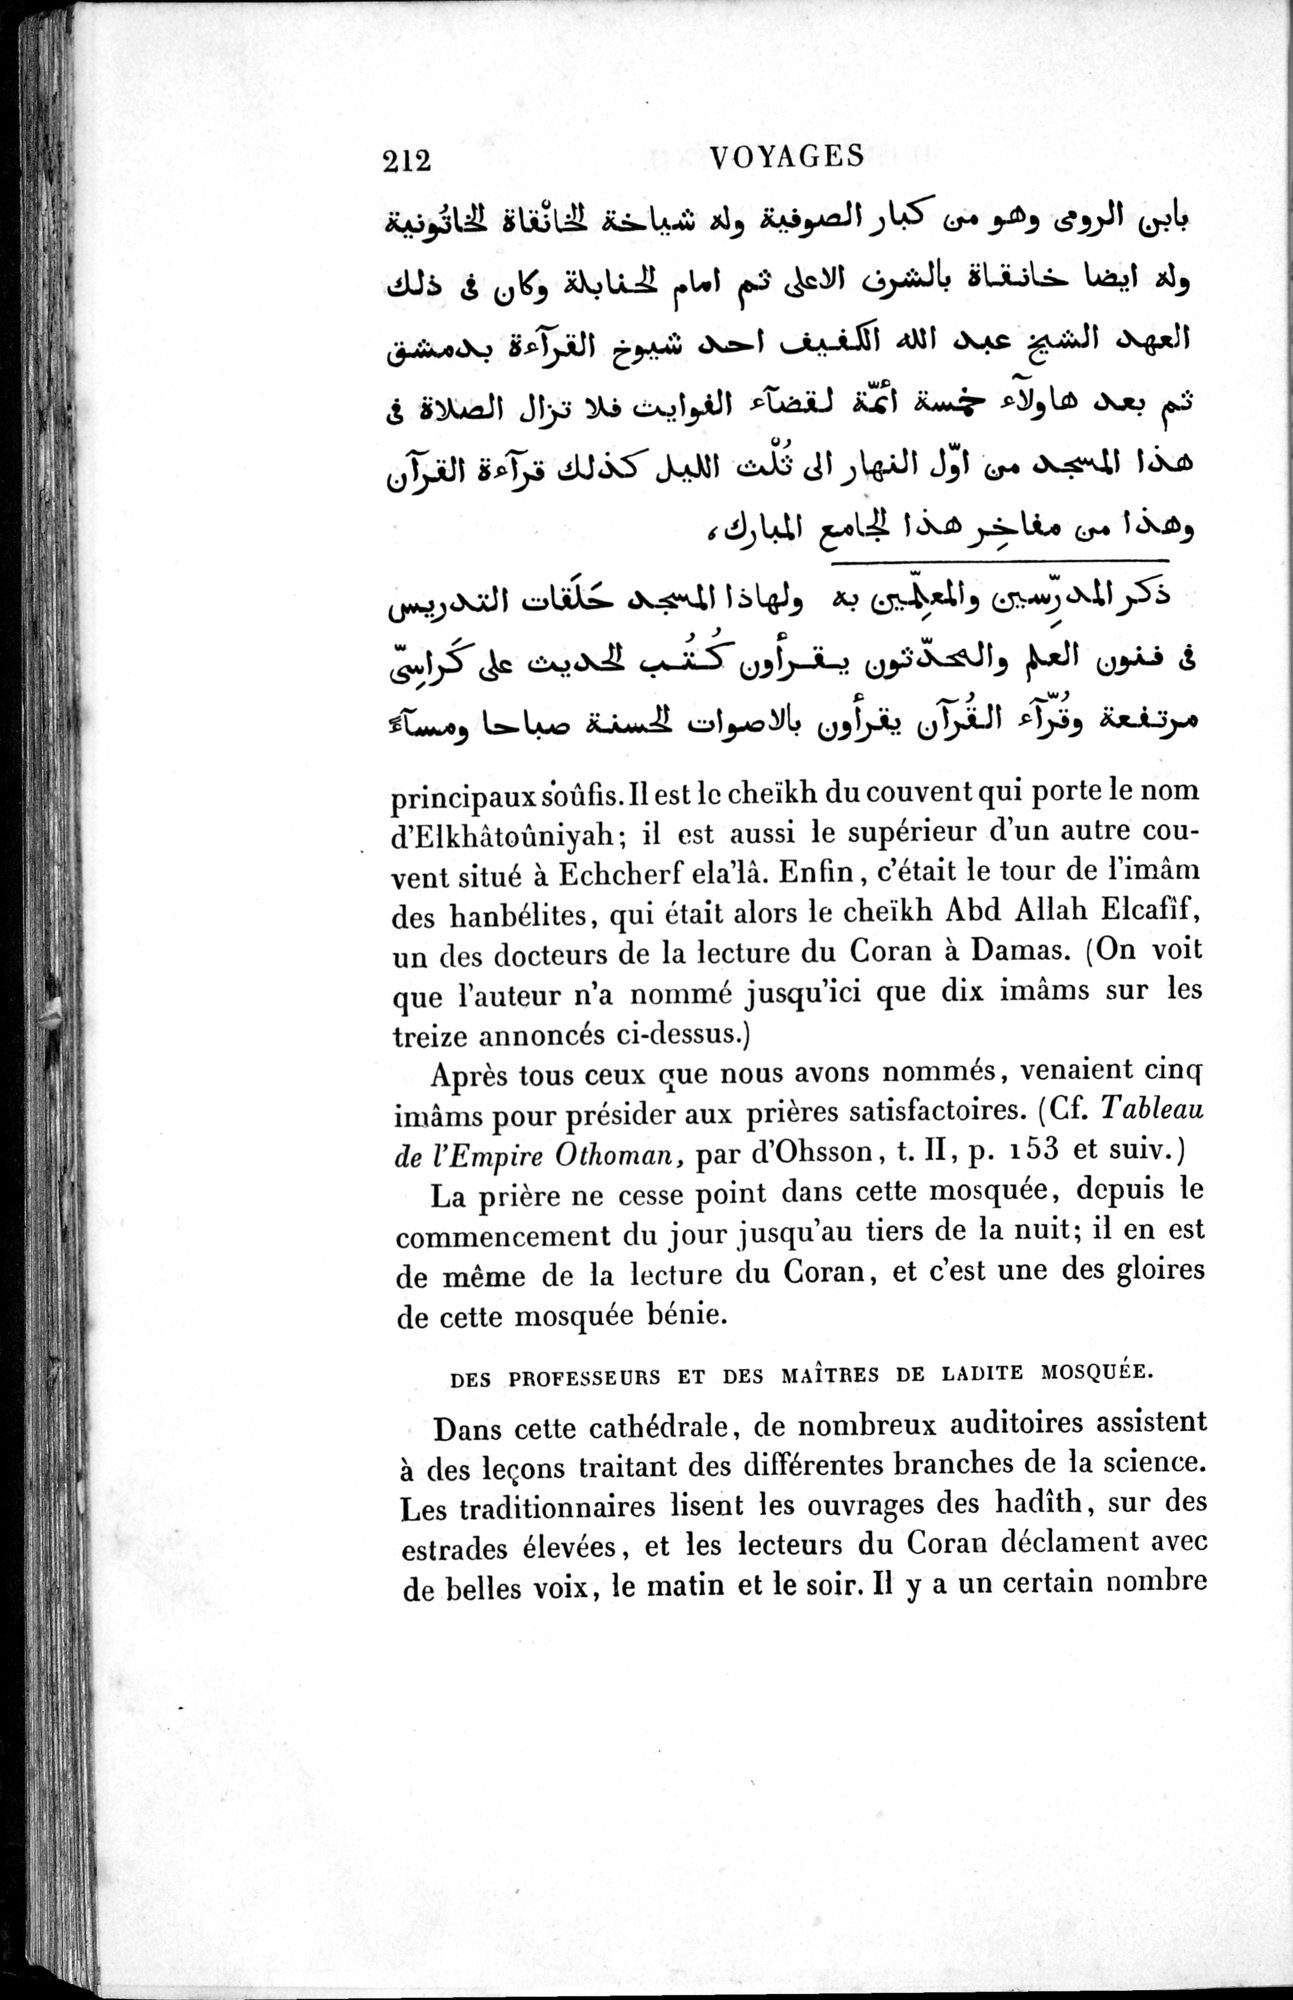 Voyages d'Ibn Batoutah : vol.1 / Page 272 (Grayscale High Resolution Image)